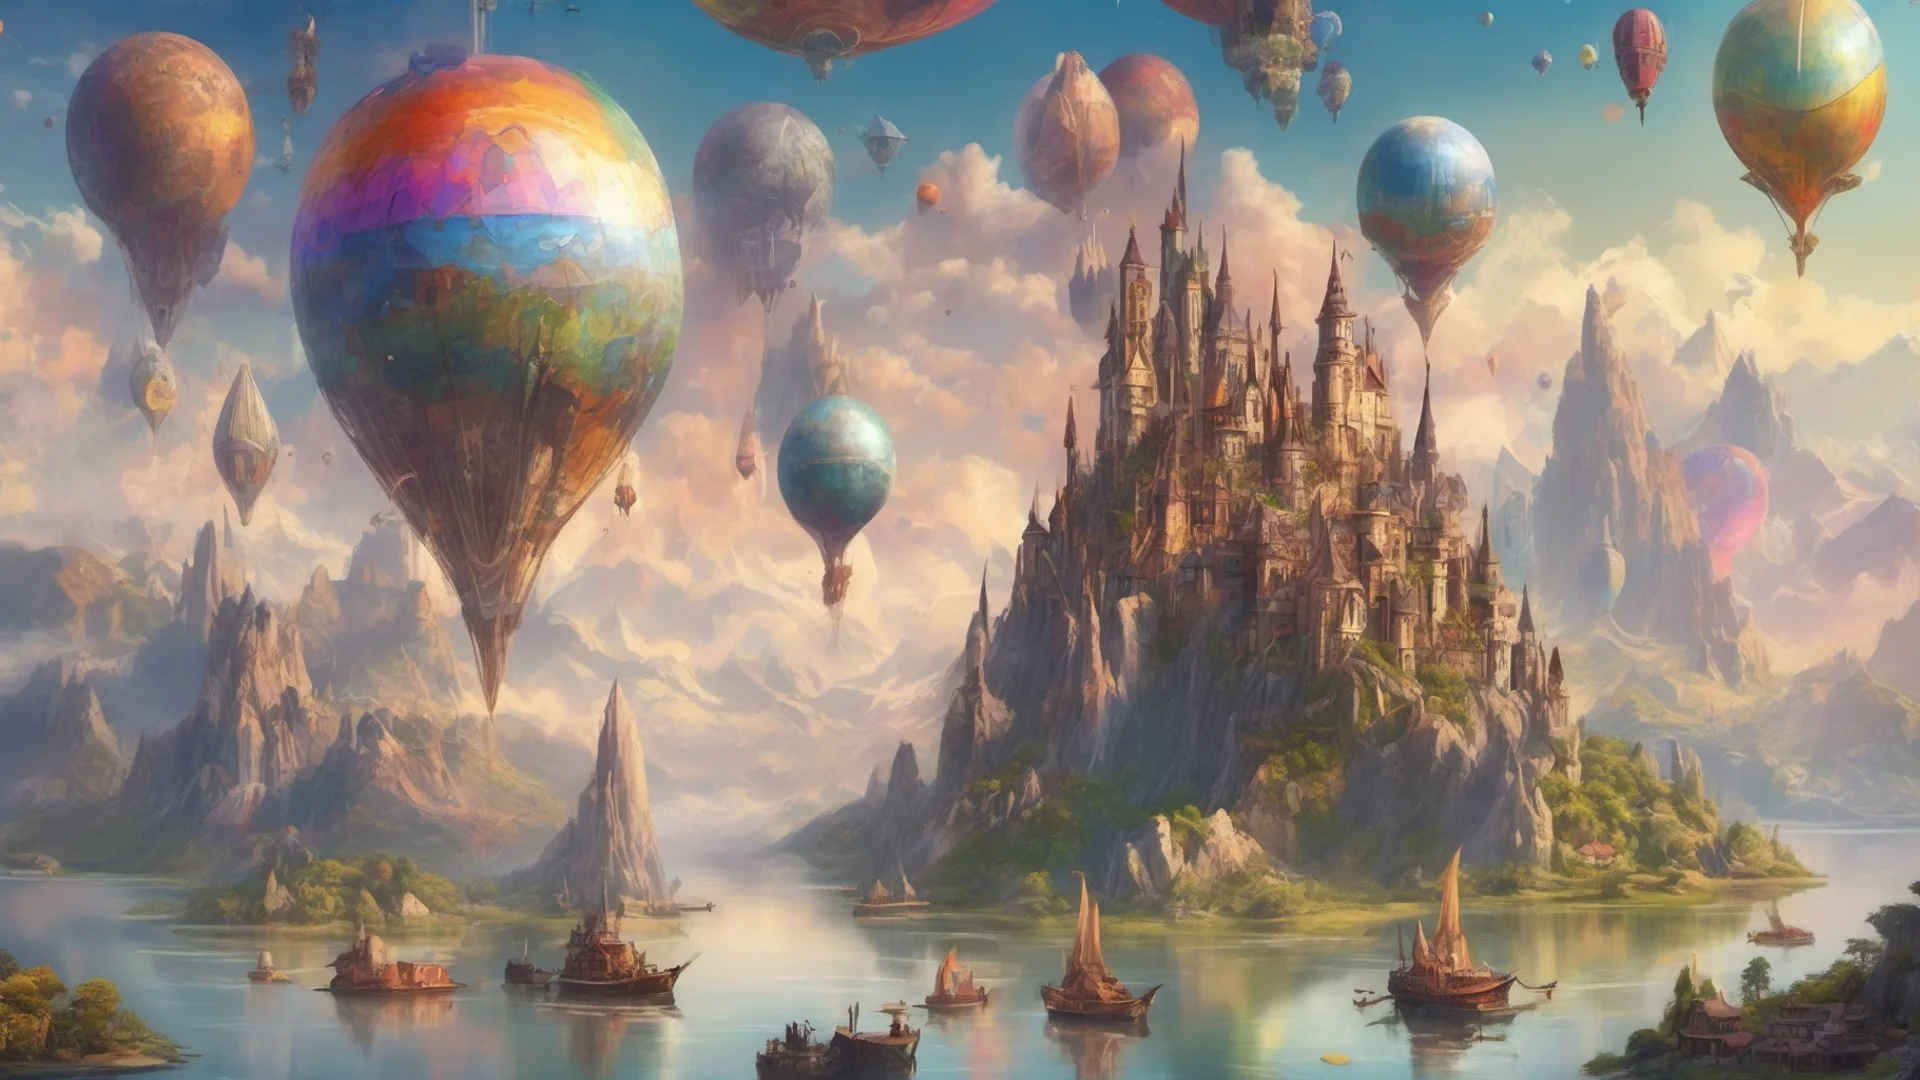 aiepic fantasy environment castle on tall mountain lakes sky with many colorful planets boats sailing airships and blimps floating   wide